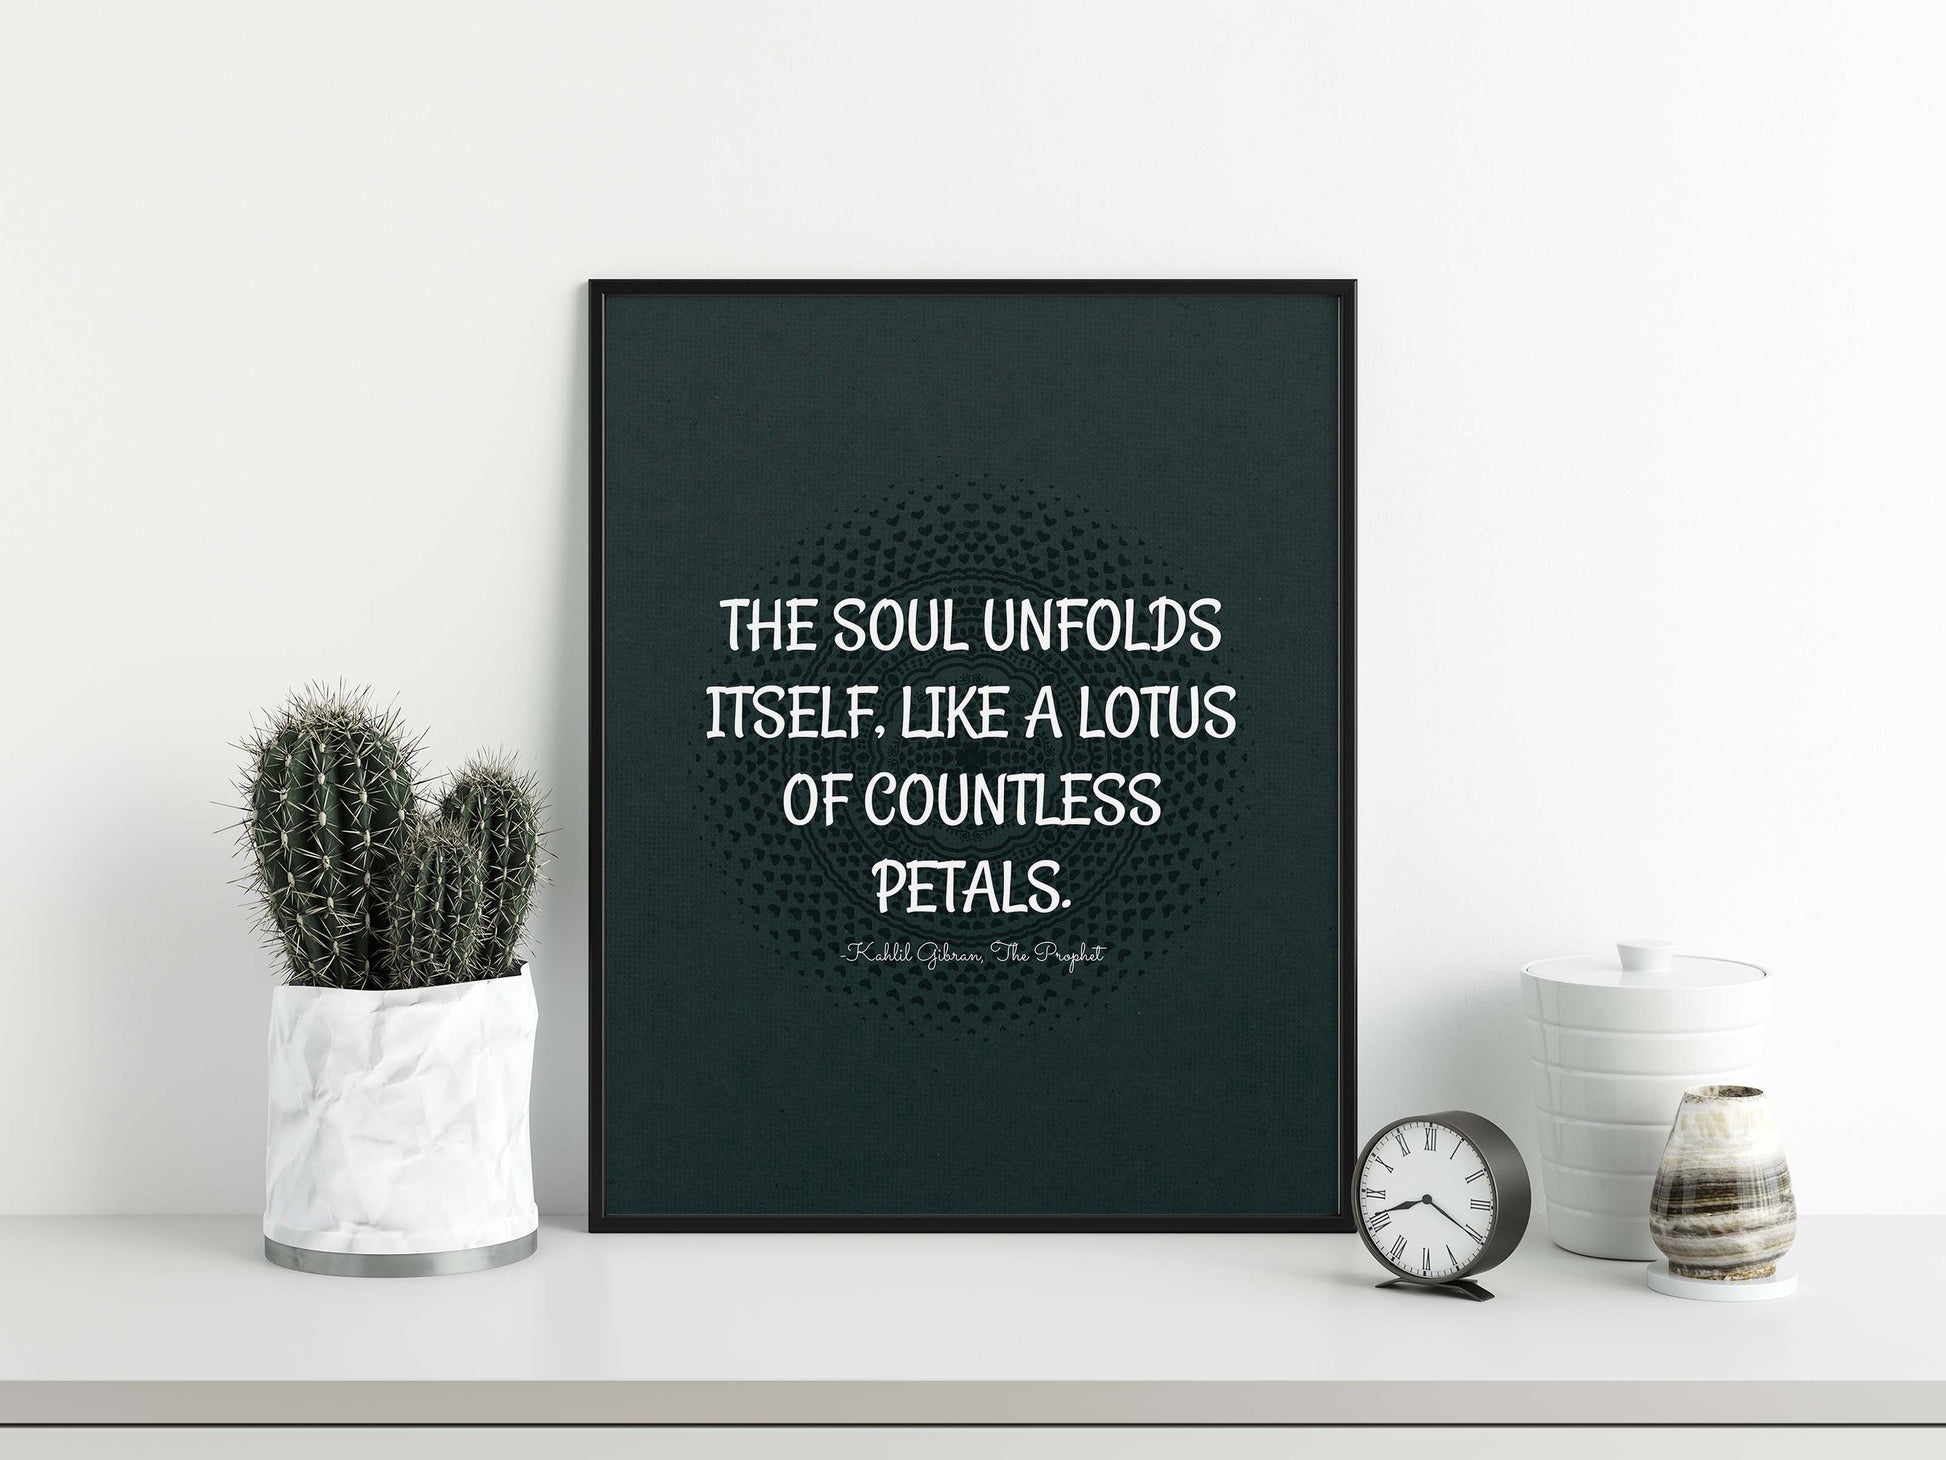 Soul spiritual quote by kahlil Gibran on green poster in black frame